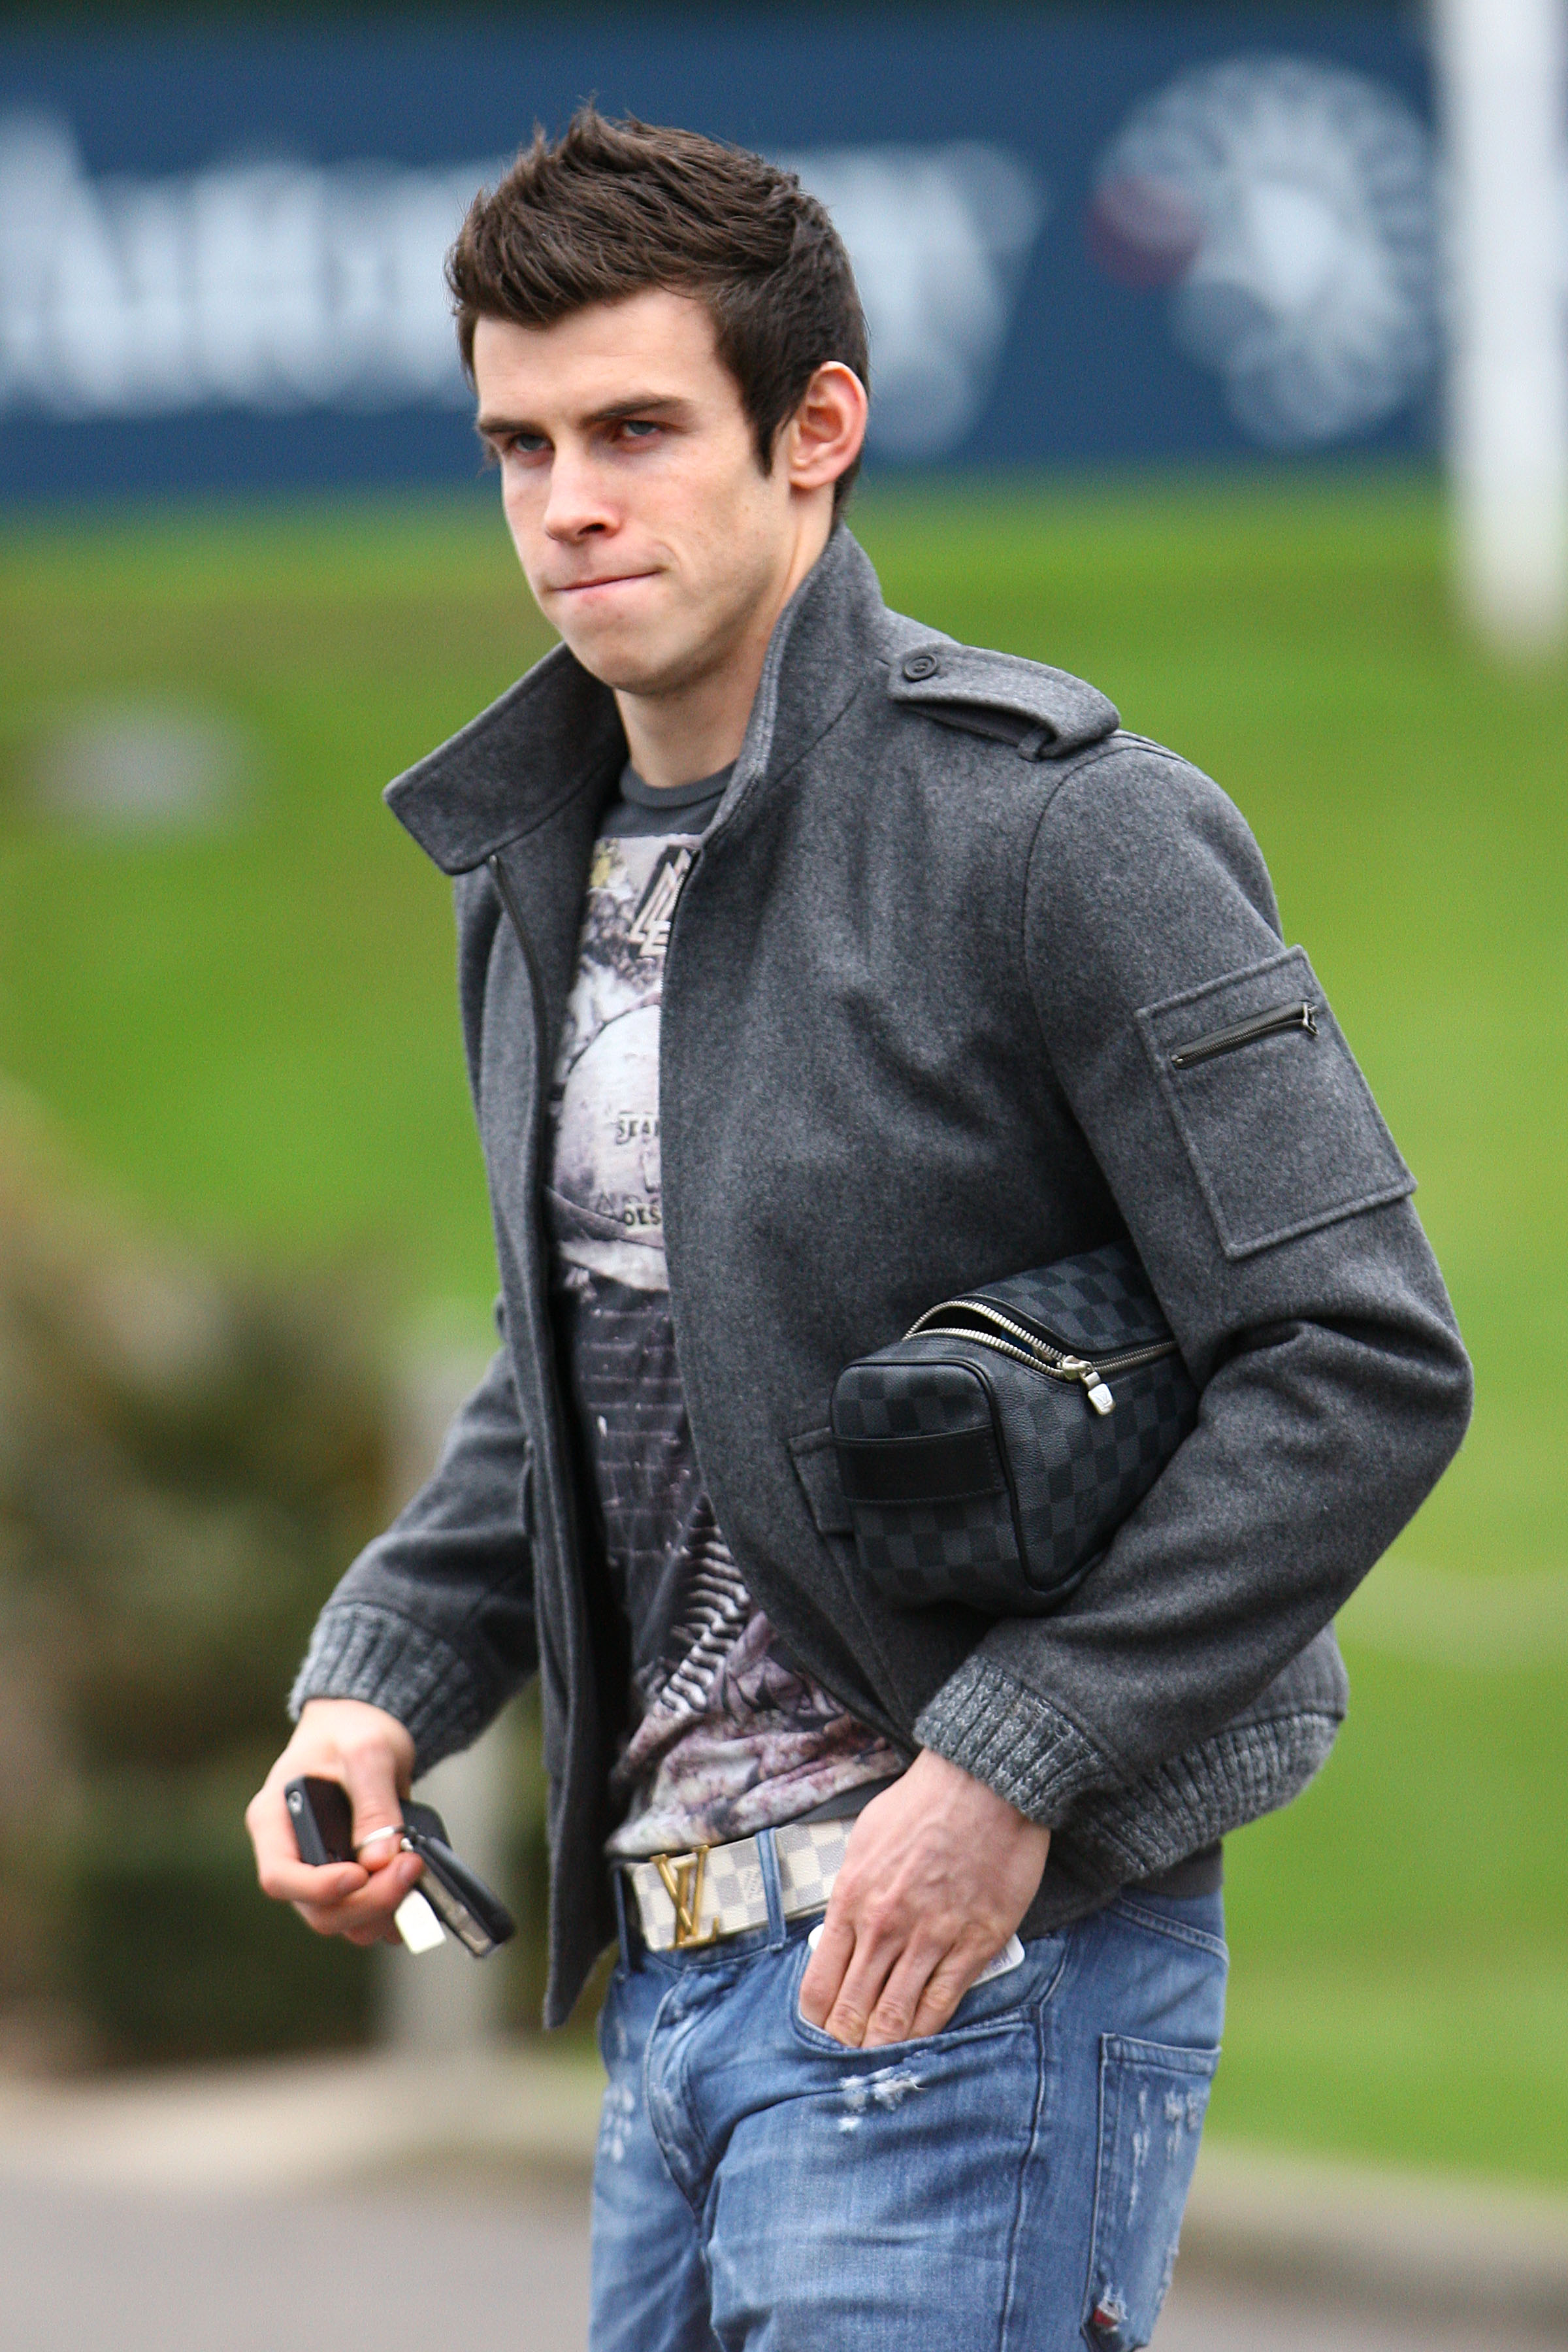 CHIGWELL, UNITED KINGDOM - JANUARY 11: Gareth Bale leaving Tottenham Hotspur's training complex on January 11, 2011 in Chigwell, England. (Photo by Neil Mockford/Getty Images)